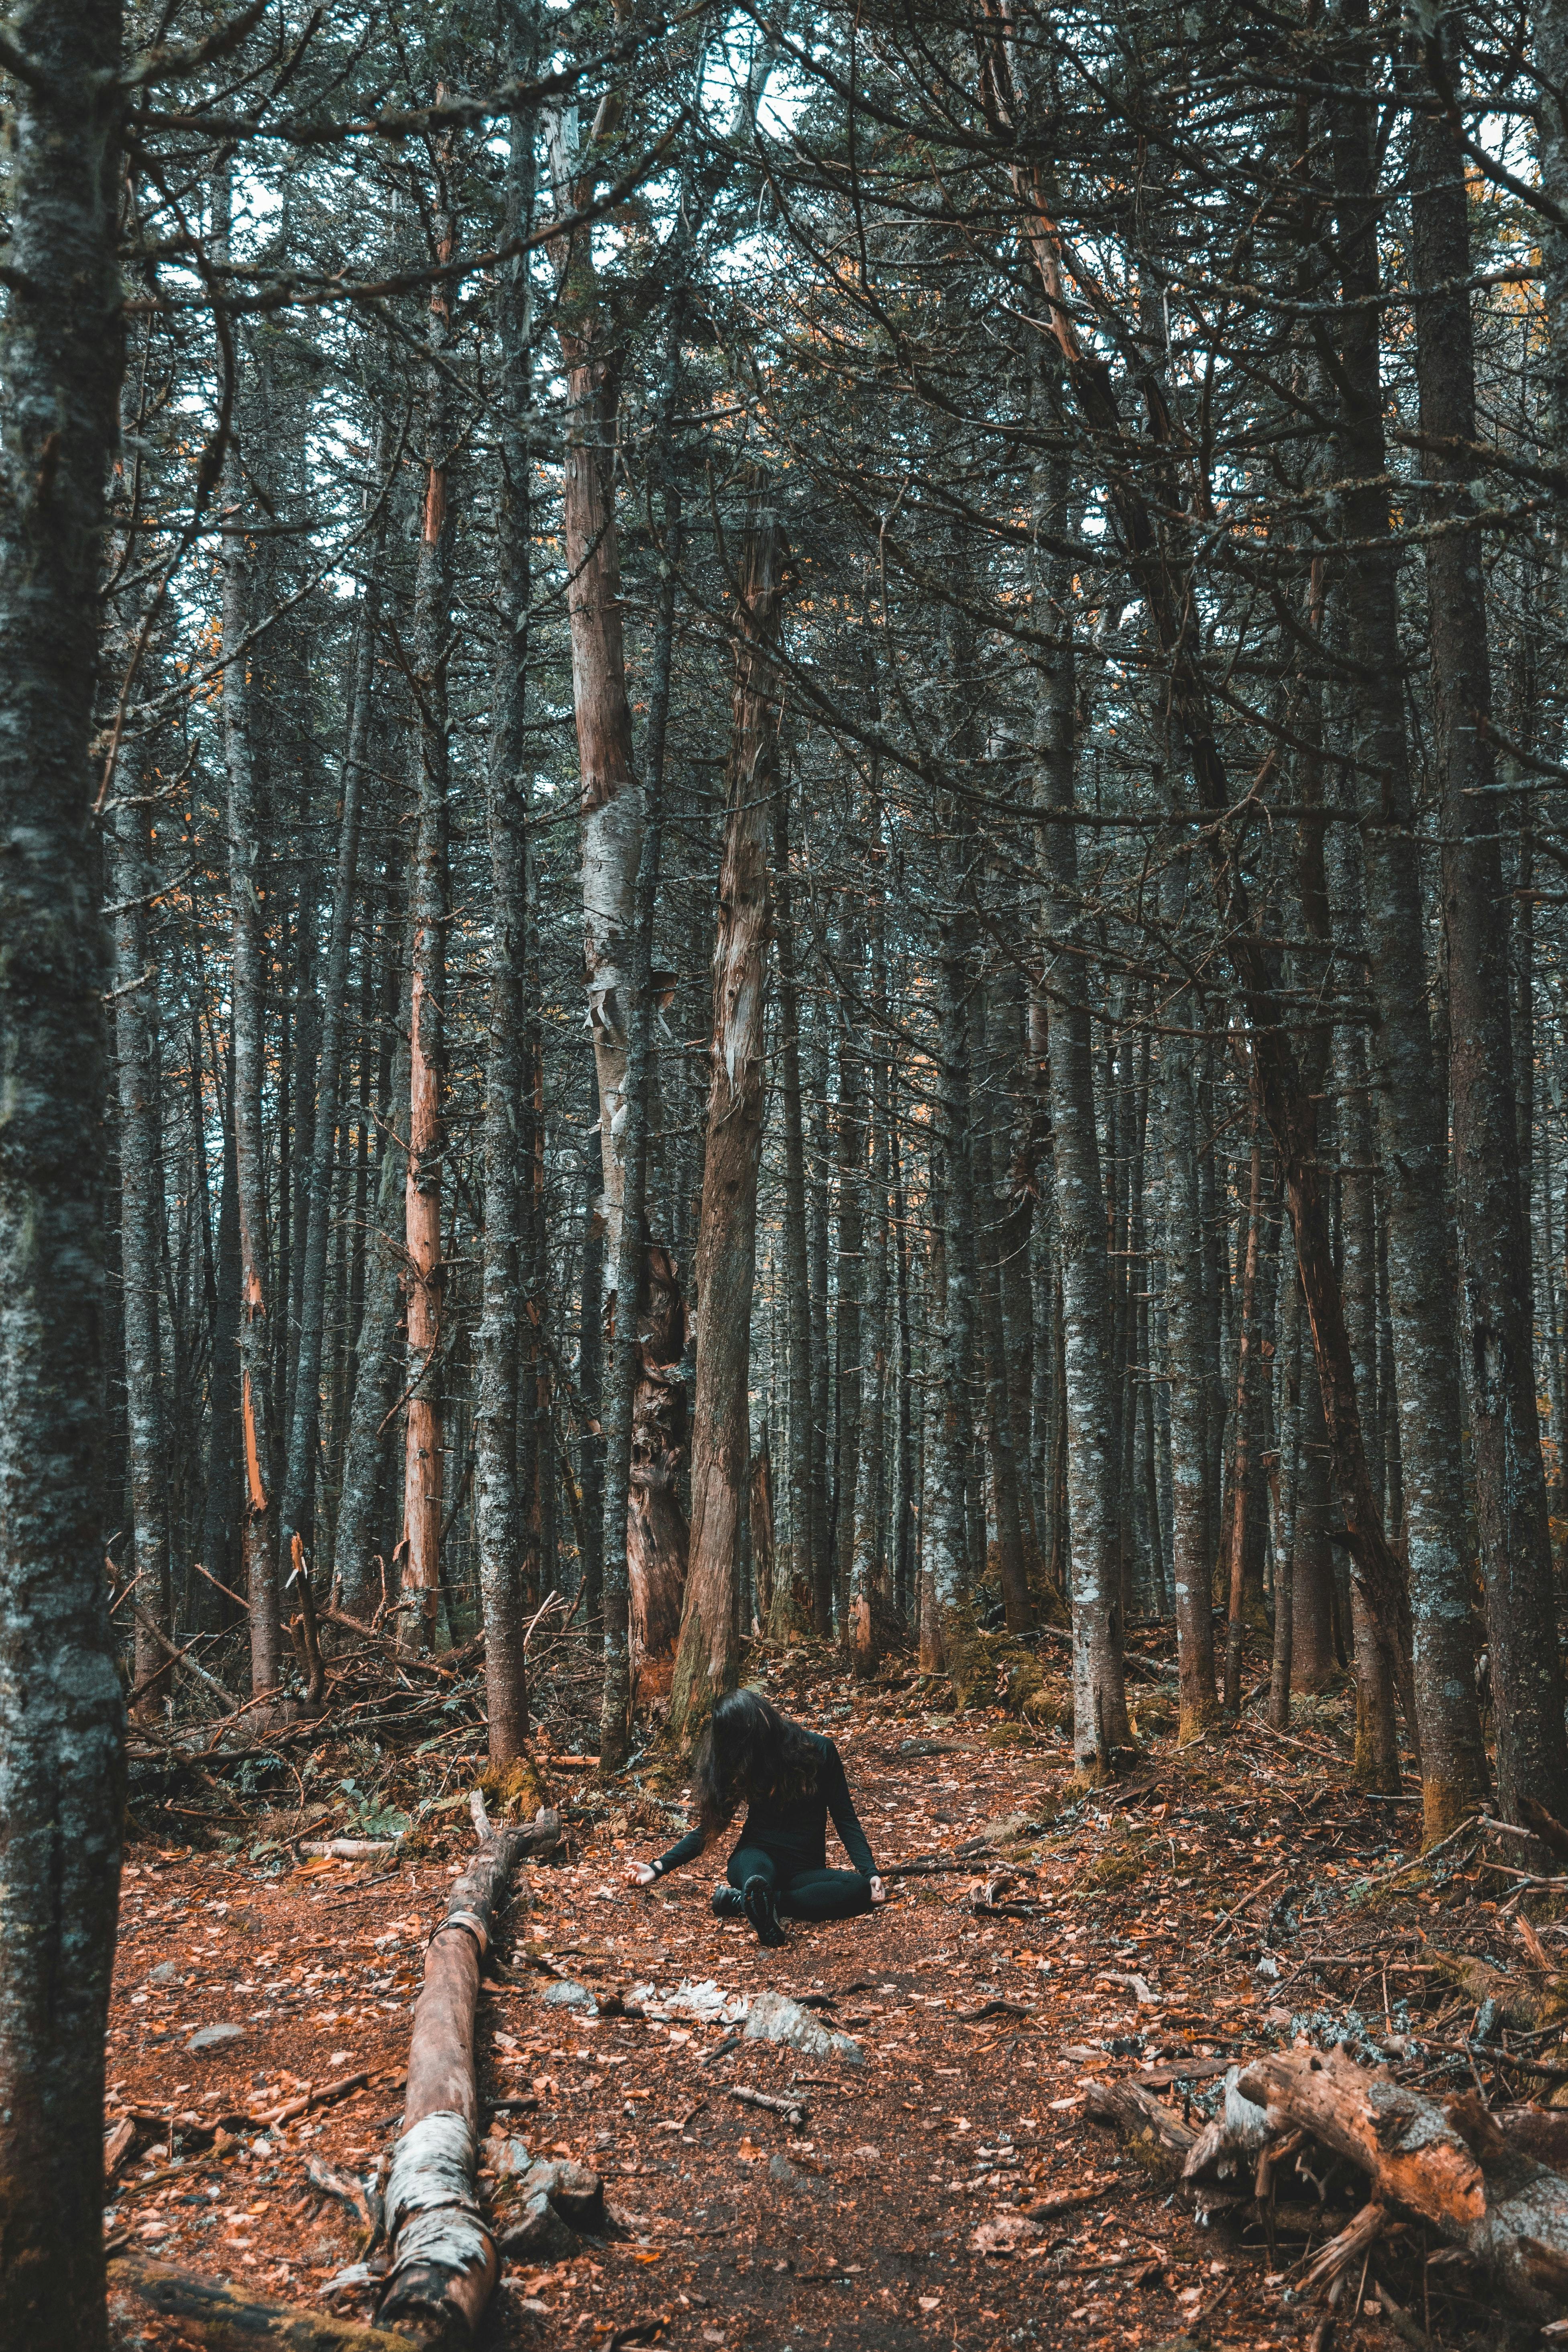 A woman sitting on the ground by a log in a forest